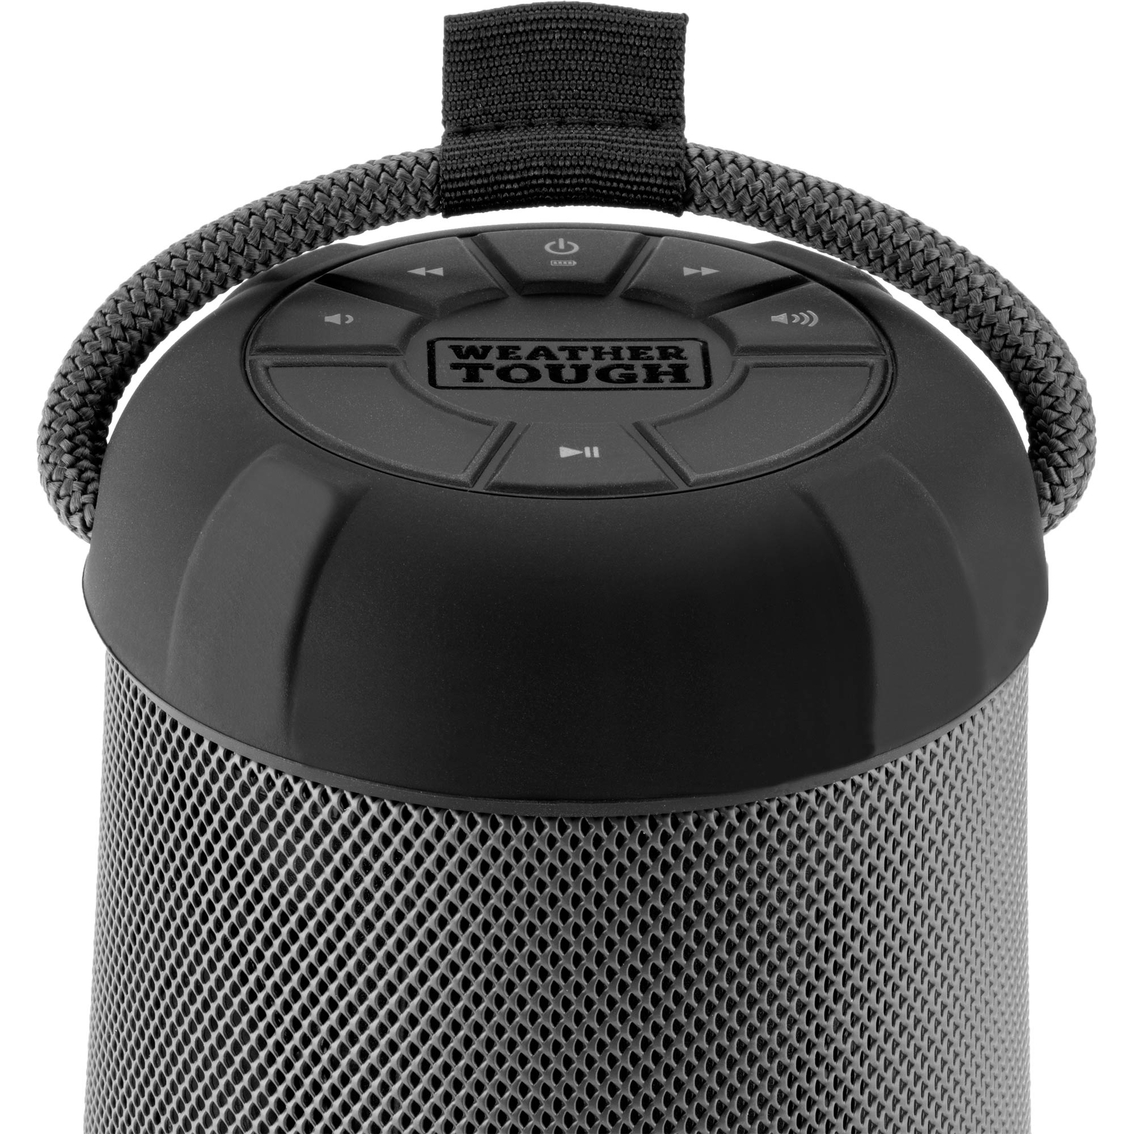 iHome PlayTough Pro Bluetooth 360 Stereo Sound Rechargeable Waterproof Speaker - Image 6 of 7